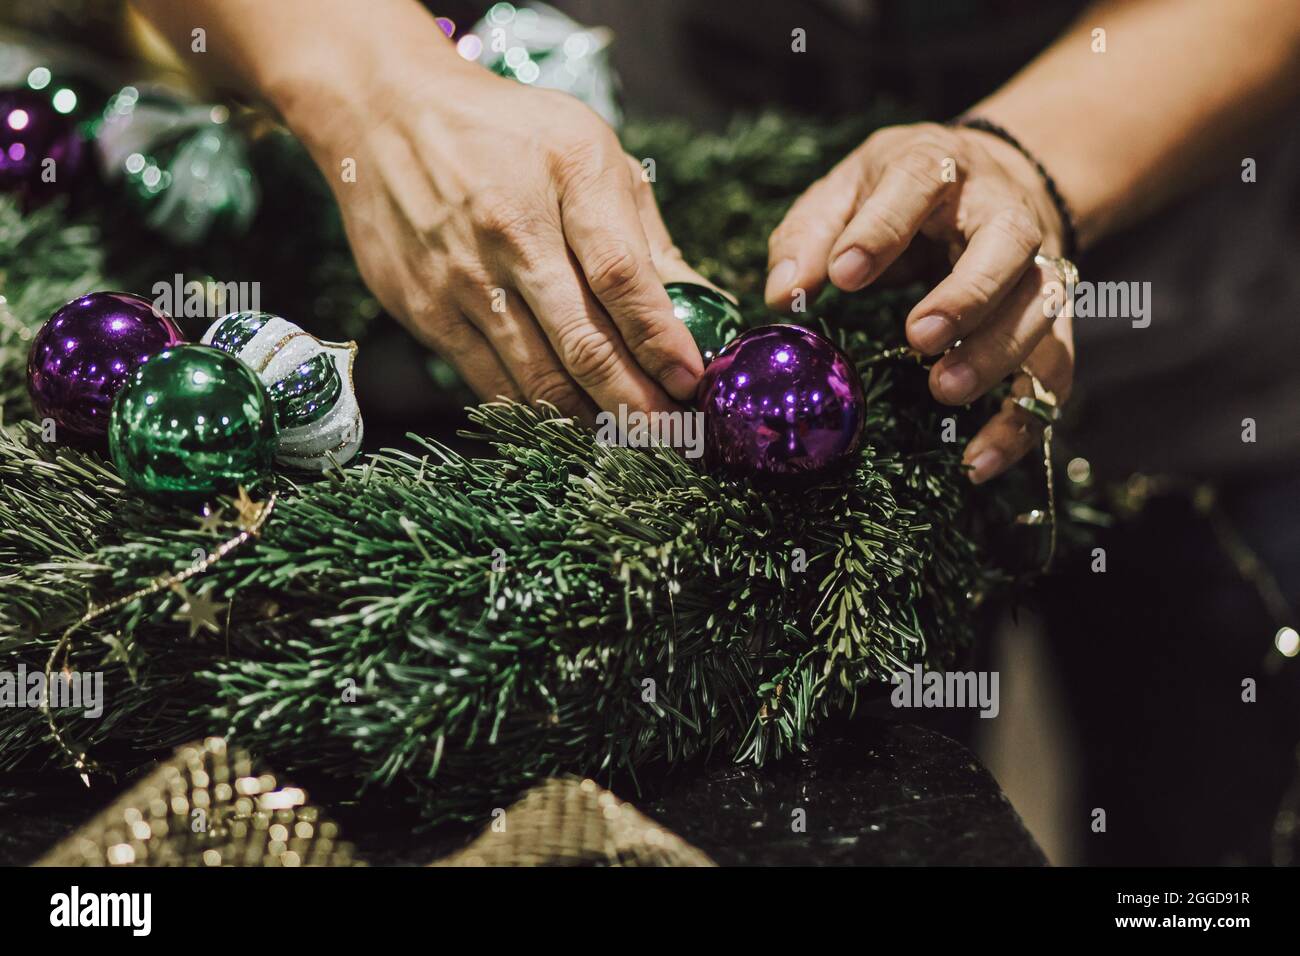 People Making Christmas Wreath with Christmas Decorations Stock Photo